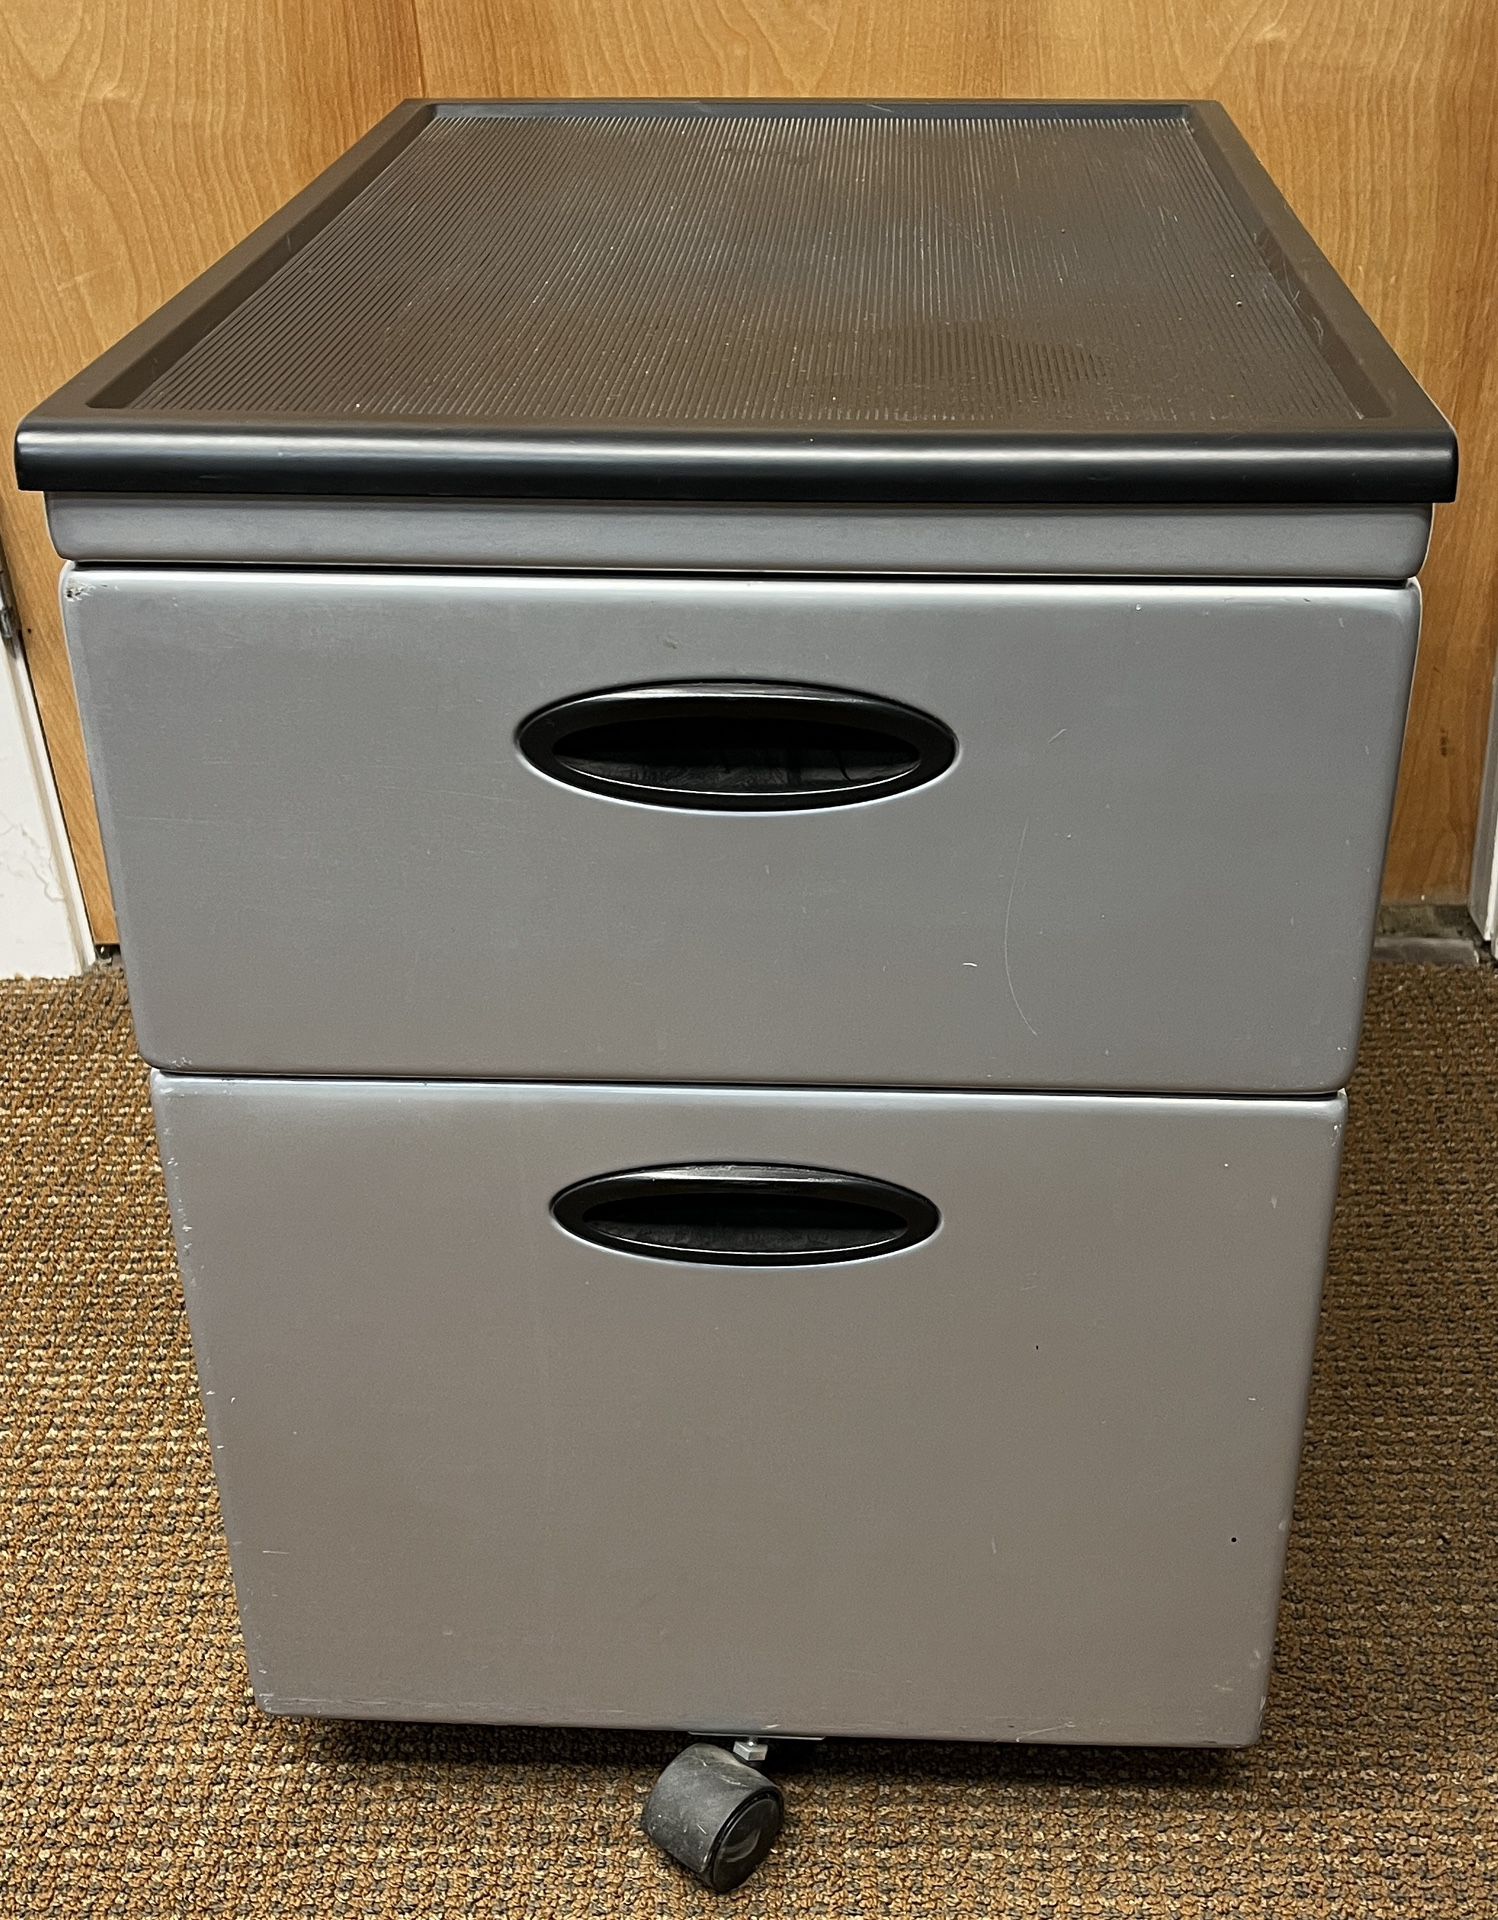 2 Drawer File Cabinet on Wheel with Disc Storage. Has dent on side